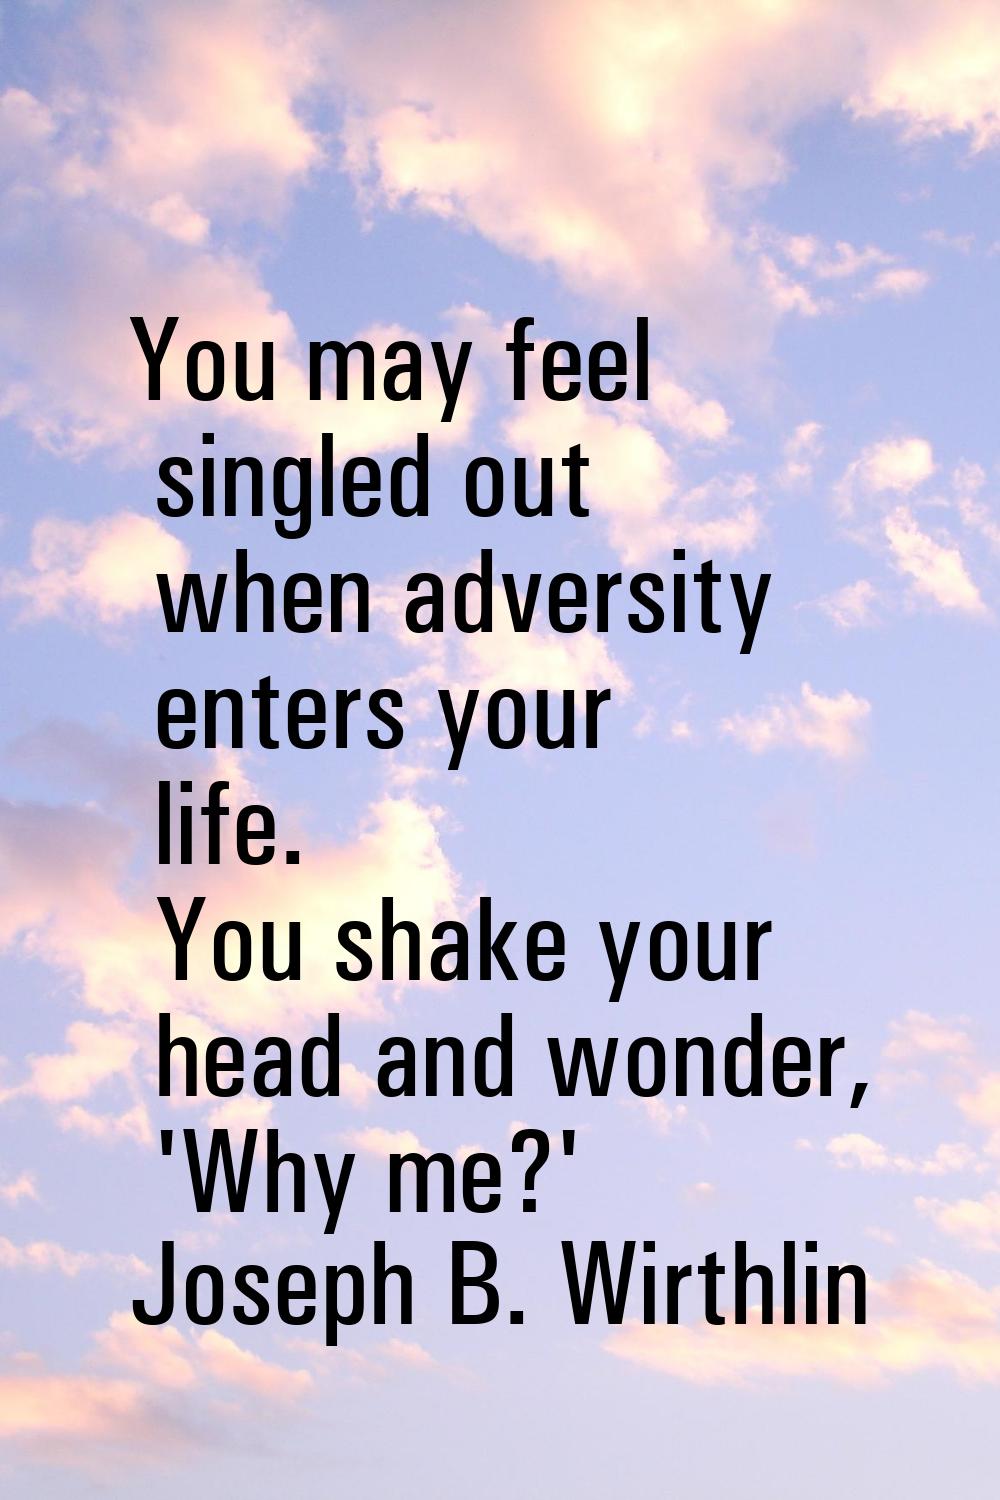 You may feel singled out when adversity enters your life. You shake your head and wonder, 'Why me?'